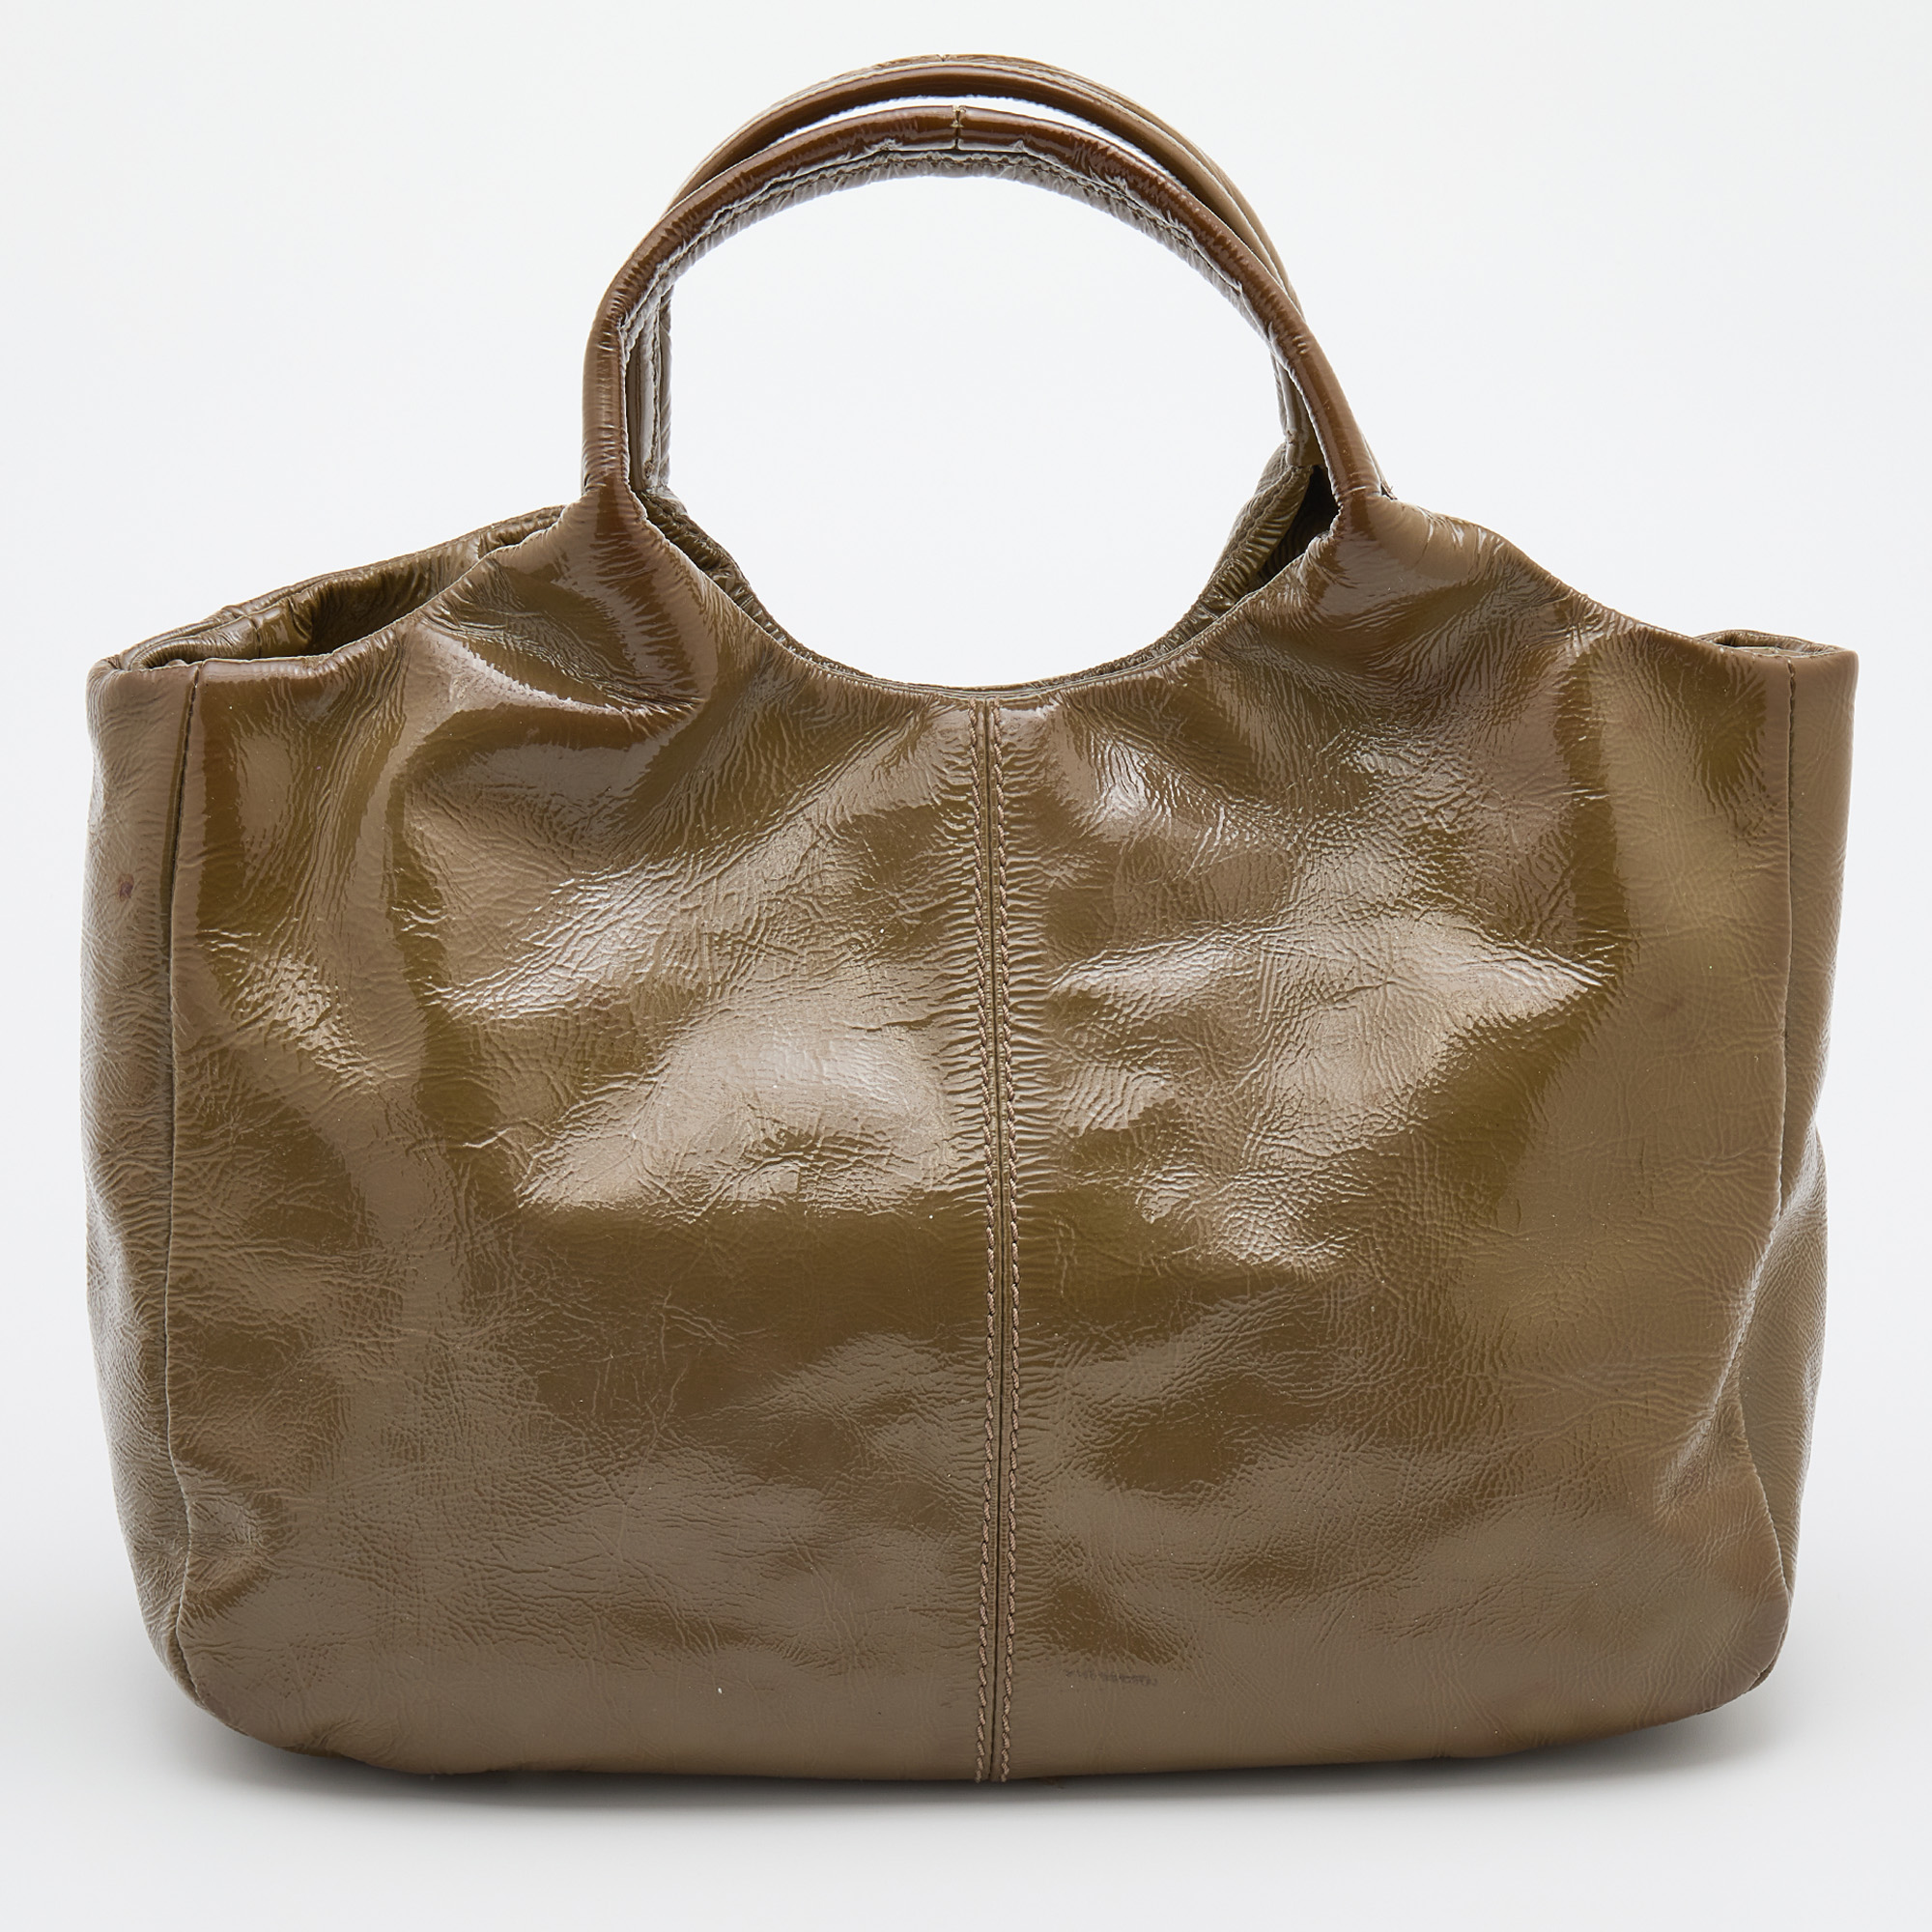 Tod's Olive Patent Leather Tote